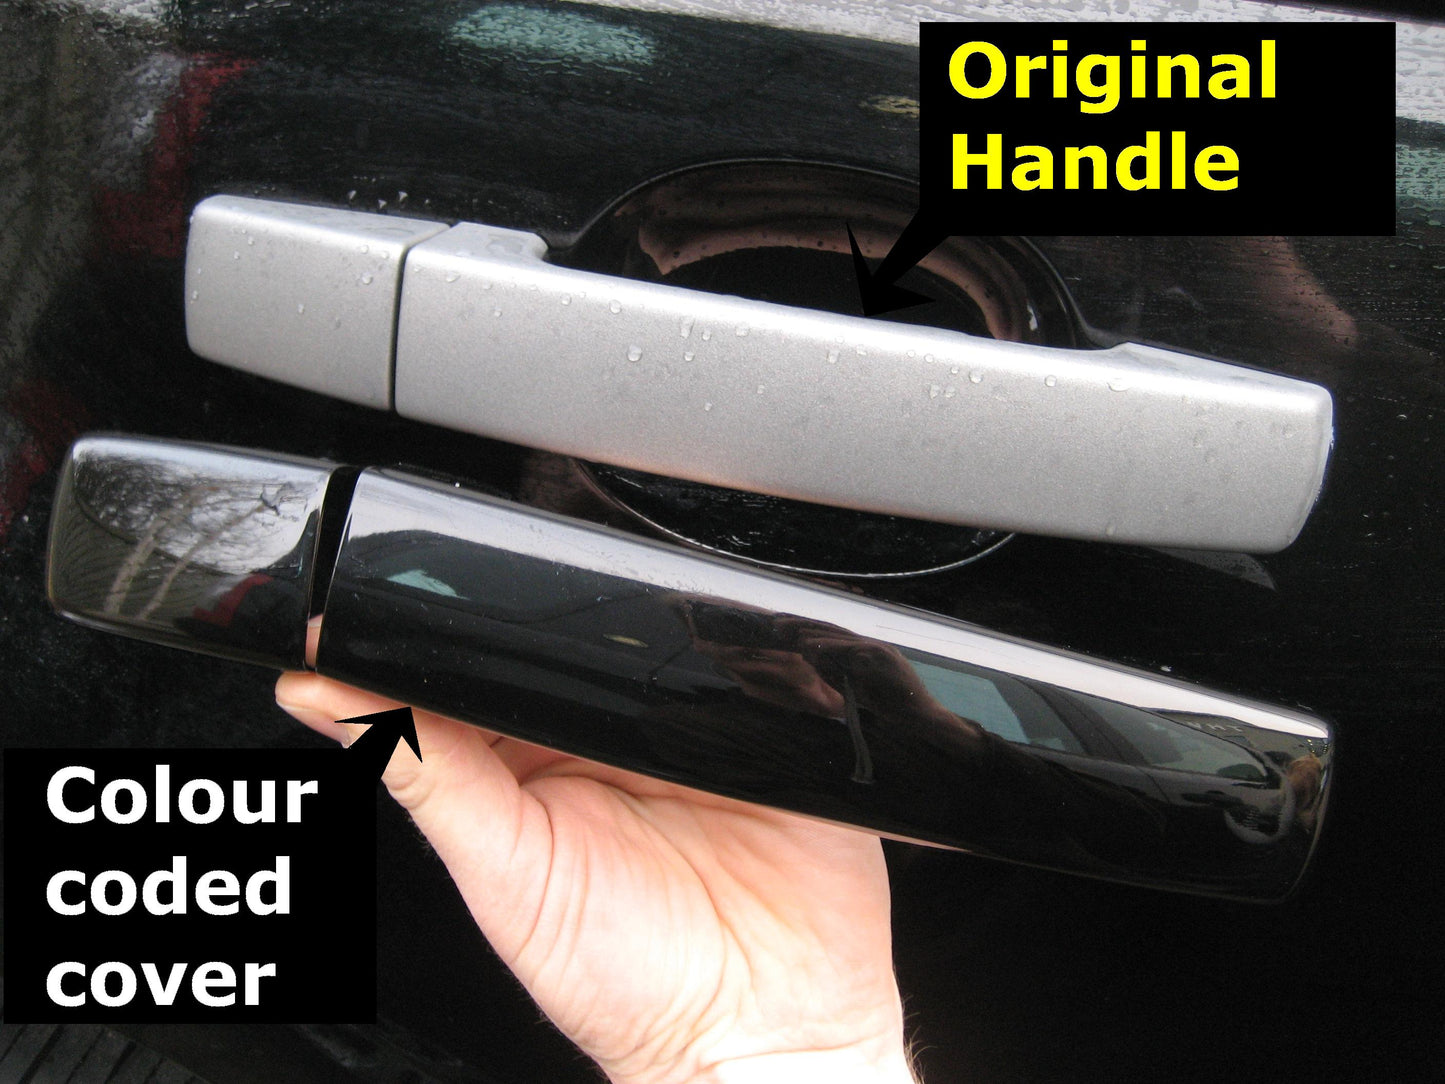 Door Handle Covers for Land Rover Freelander 2 fitted with 2 pc Handles  - Java Black